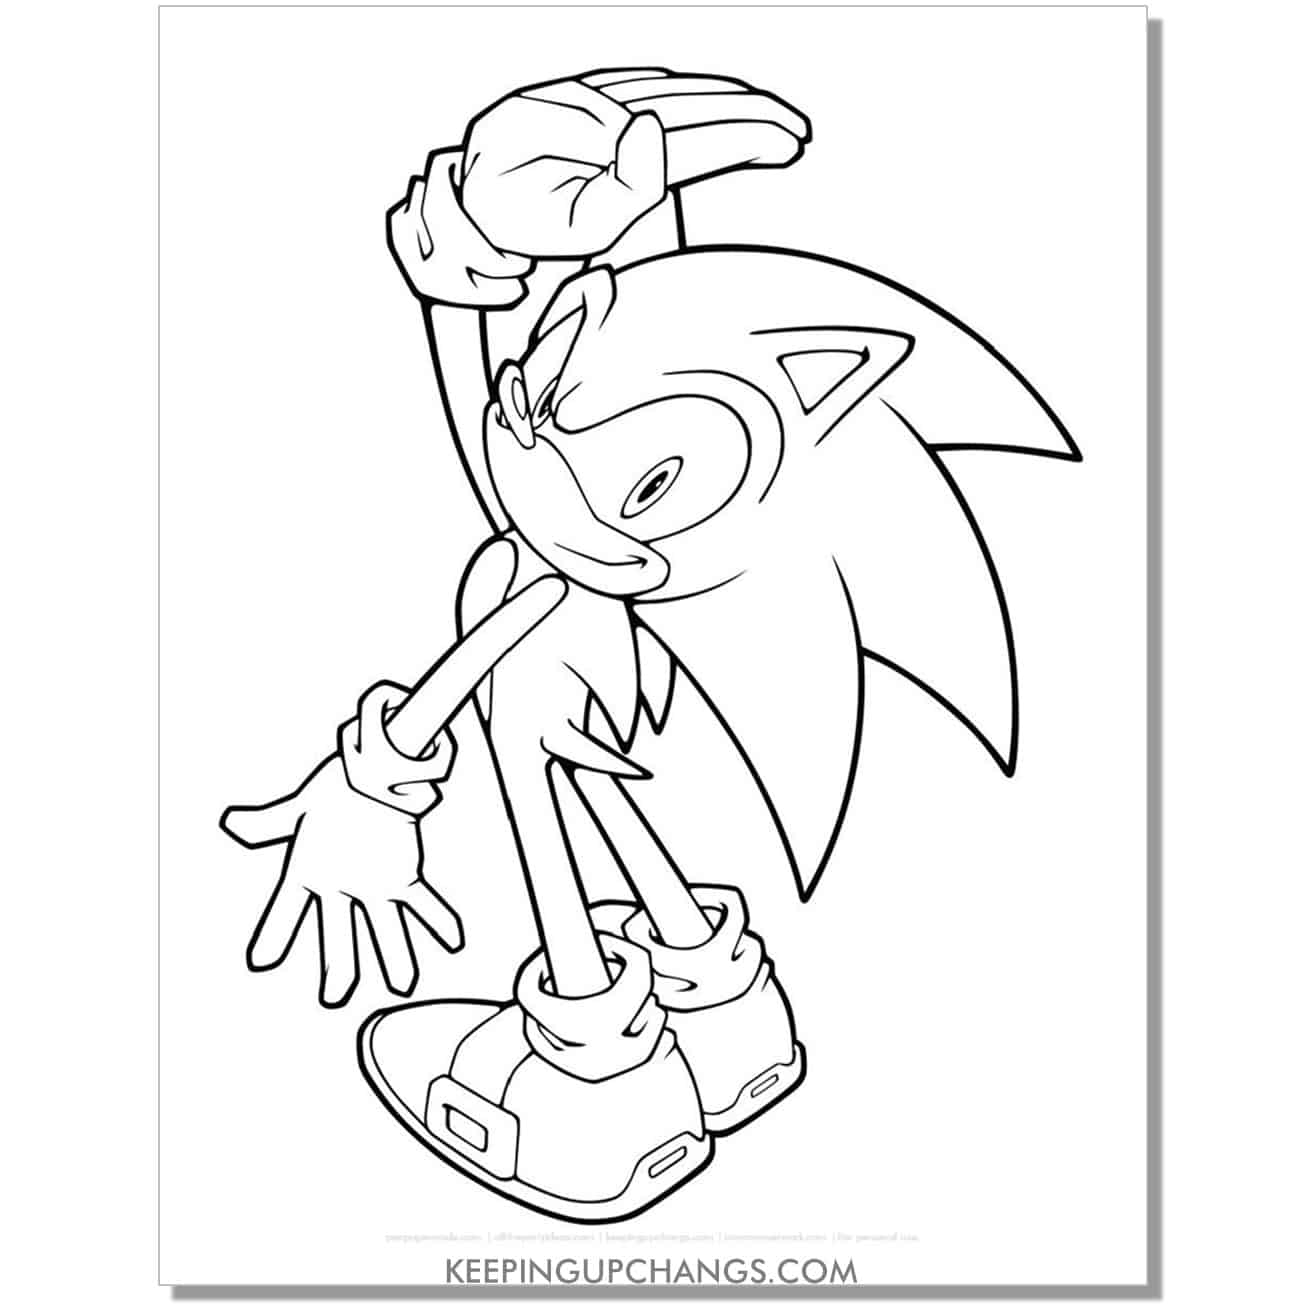 sonic lift hand up for high five coloring page.